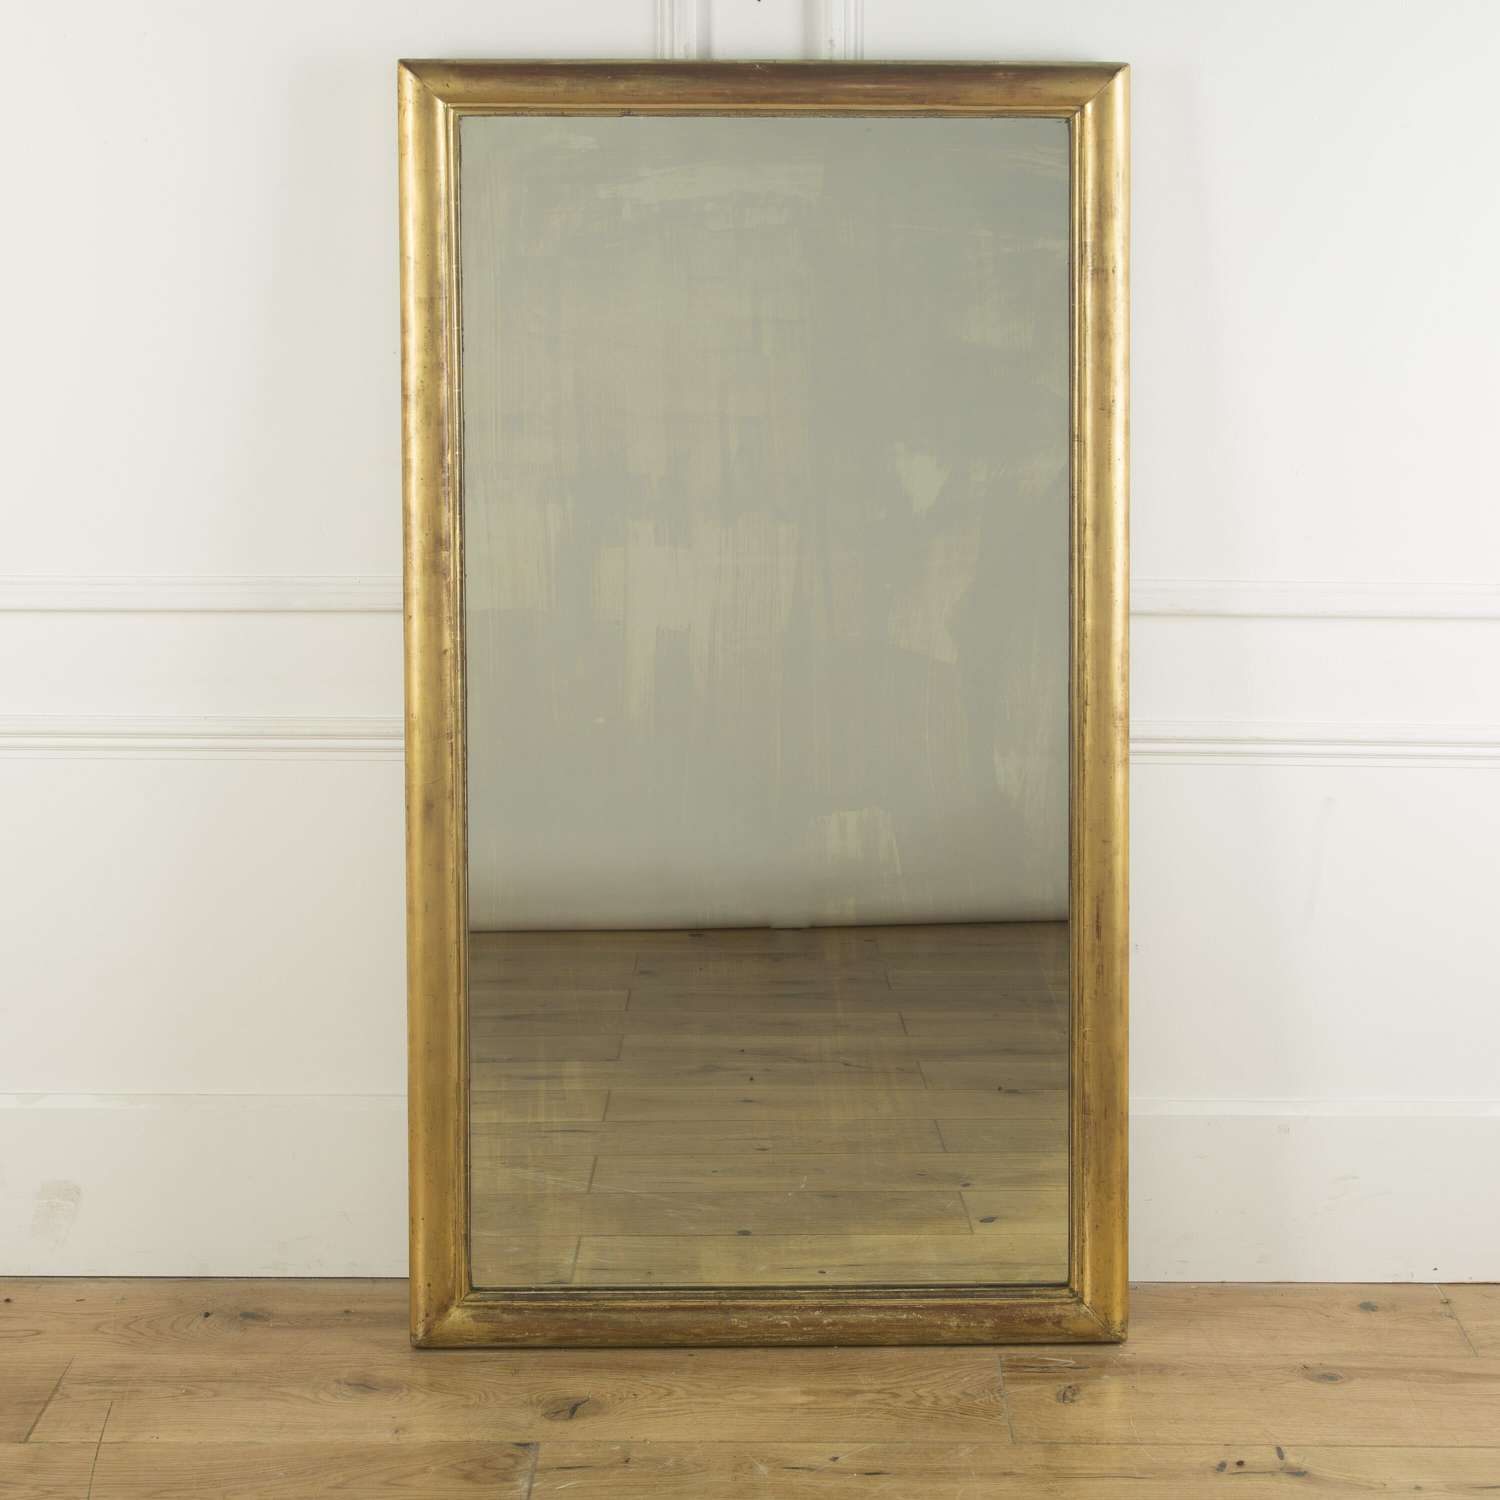 A large Giltwood mirror